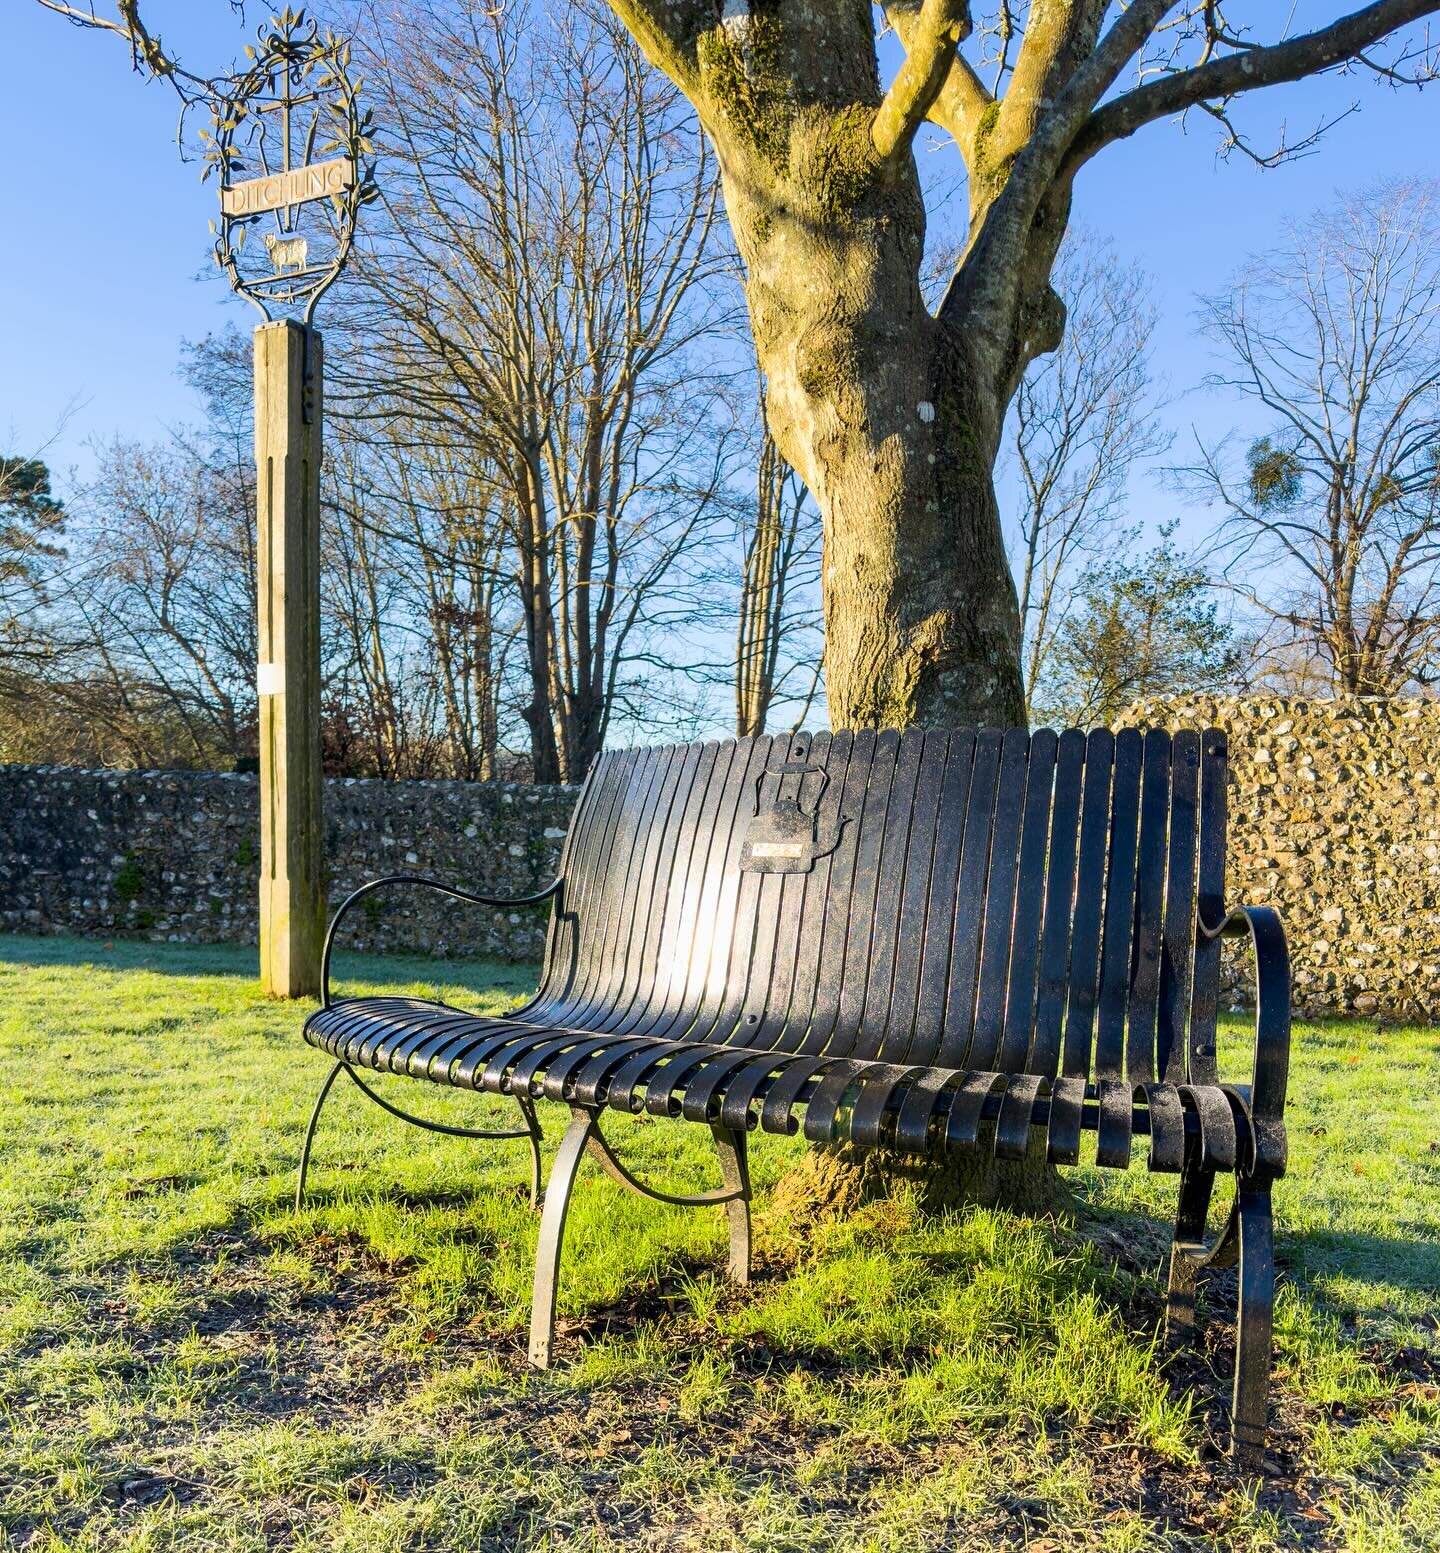 We took a quick detour to catch this memorial bench in a spectacular morning sun 
☀️ ⚒️🔨

#metalart #metalaetist #blacksmith #blacksmithing #forged #fireweld #handmade #bespoke #traditional #craftman #craft #form #ironwork #smallbusiness #sussexbusi